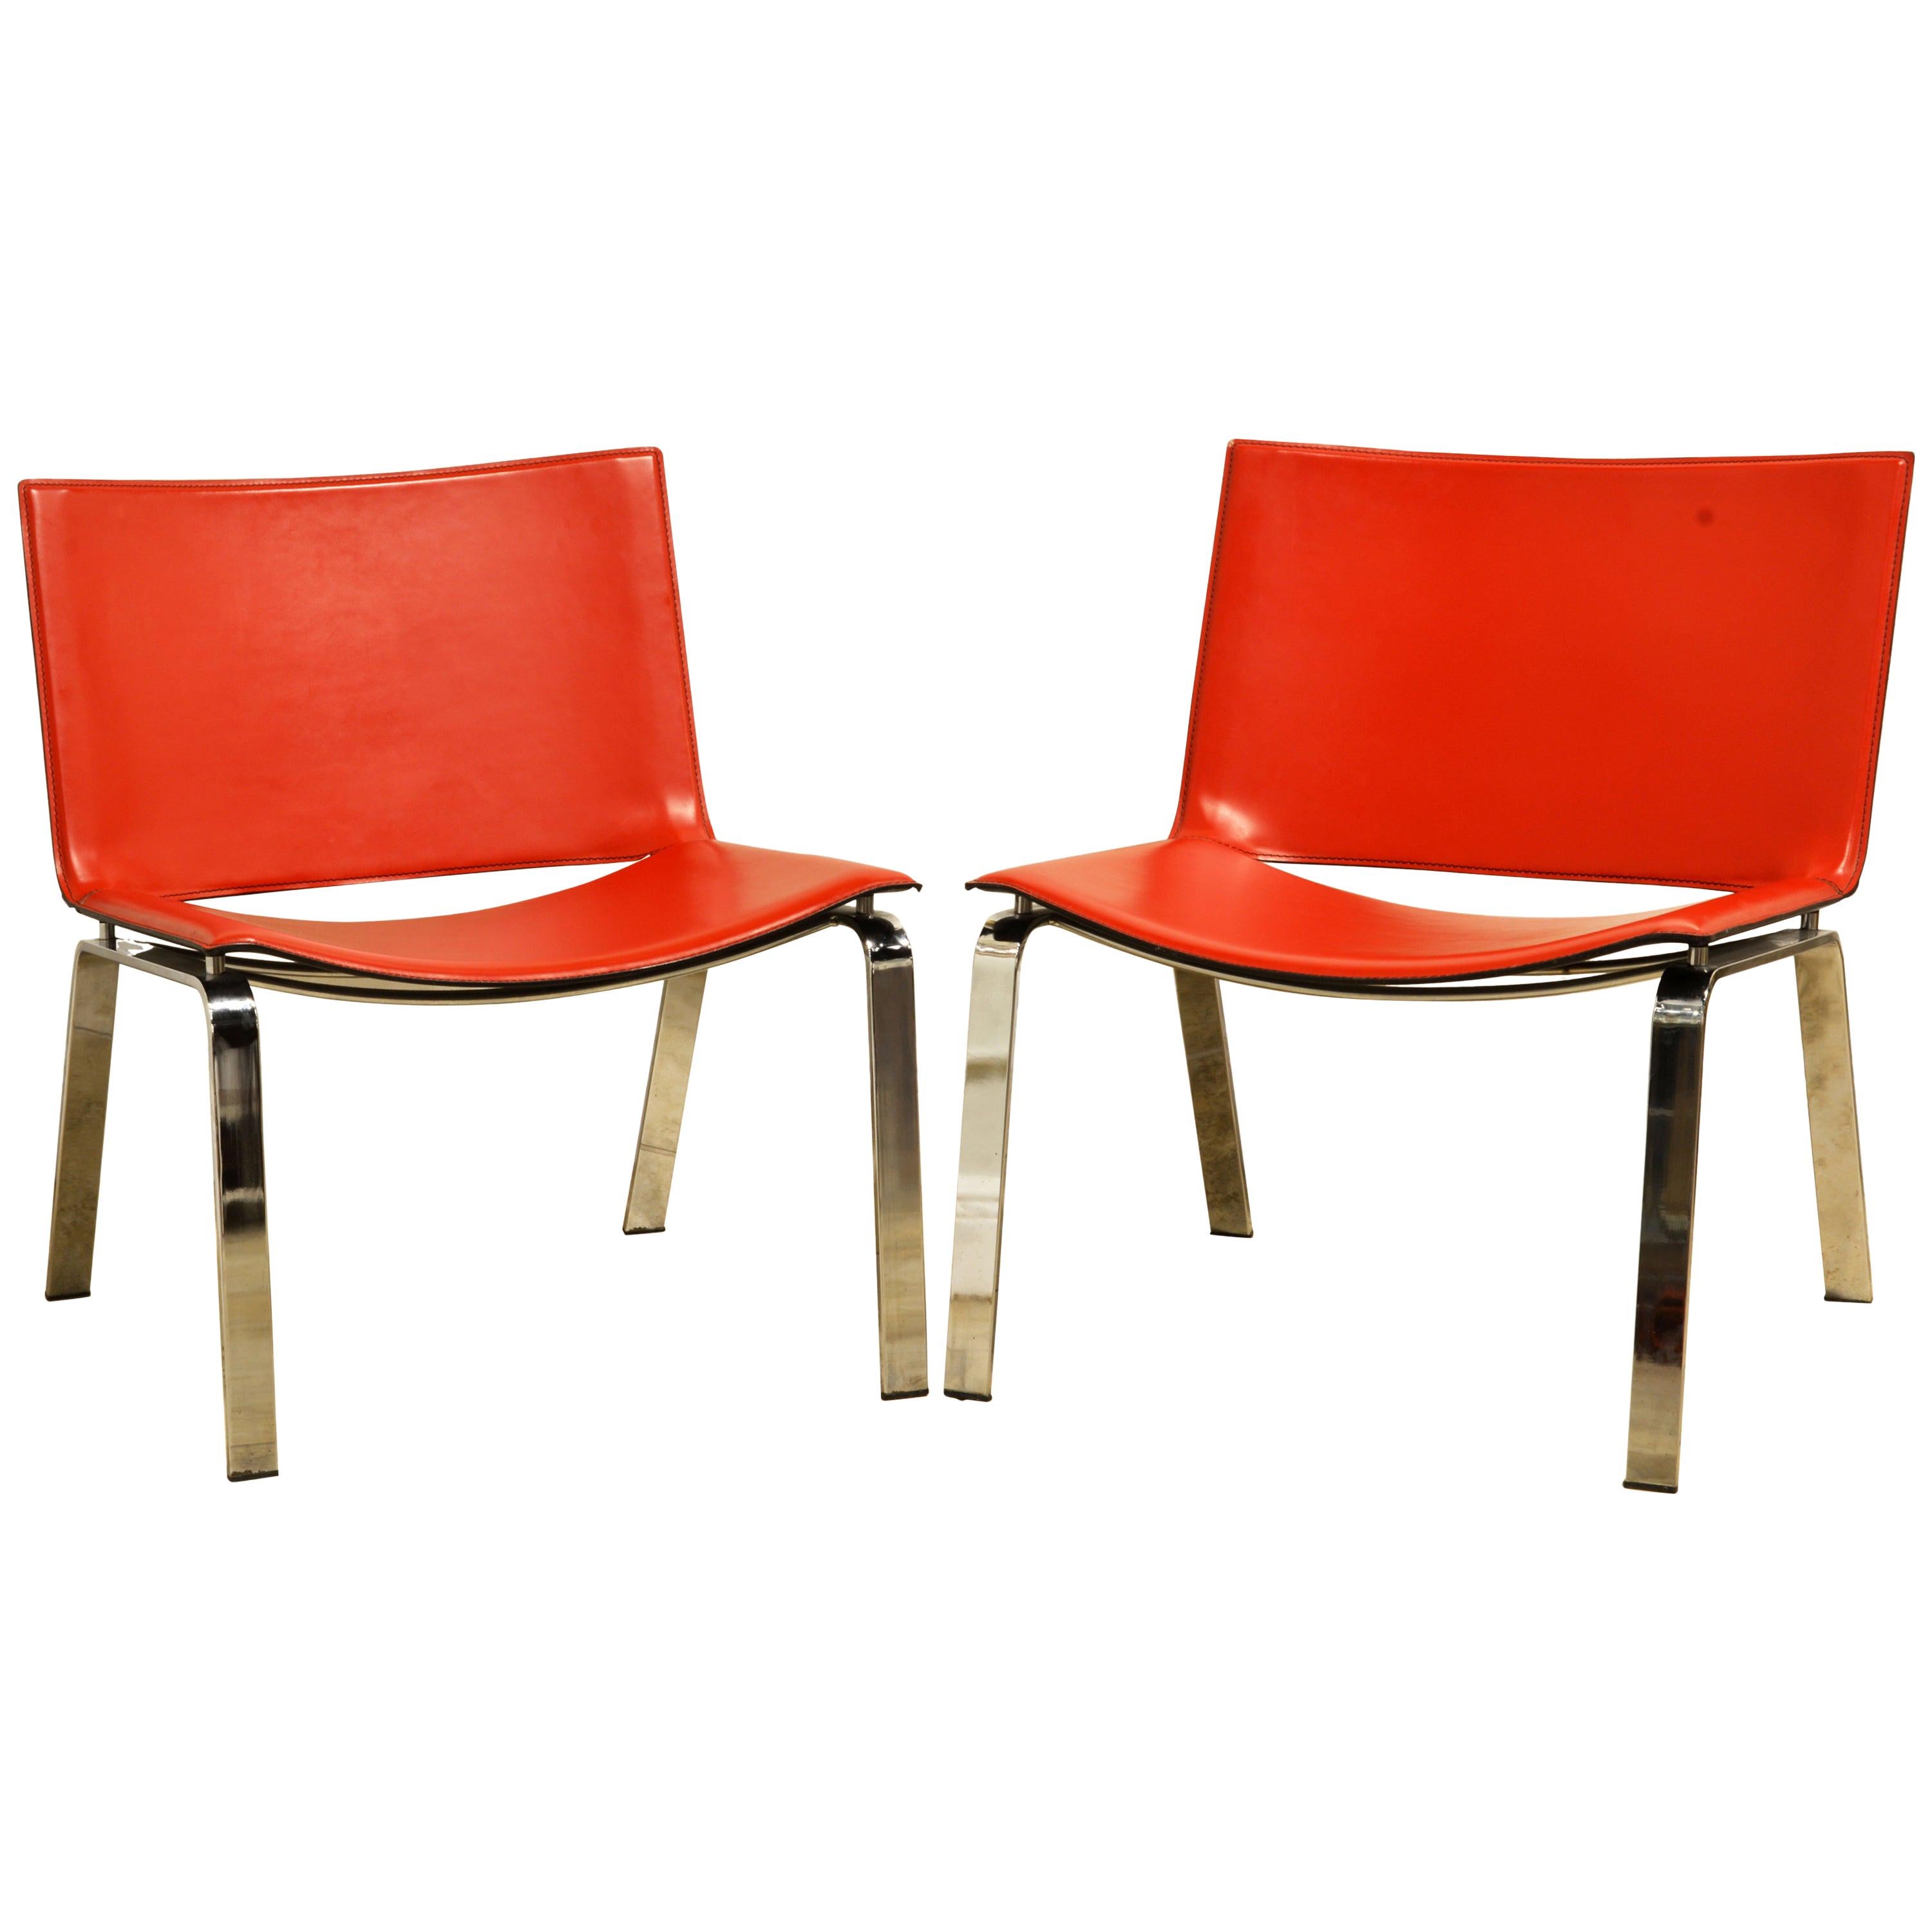 Pair of Vintage Italian Red Leather and Steel Lounge Chairs by Cattelan Italia